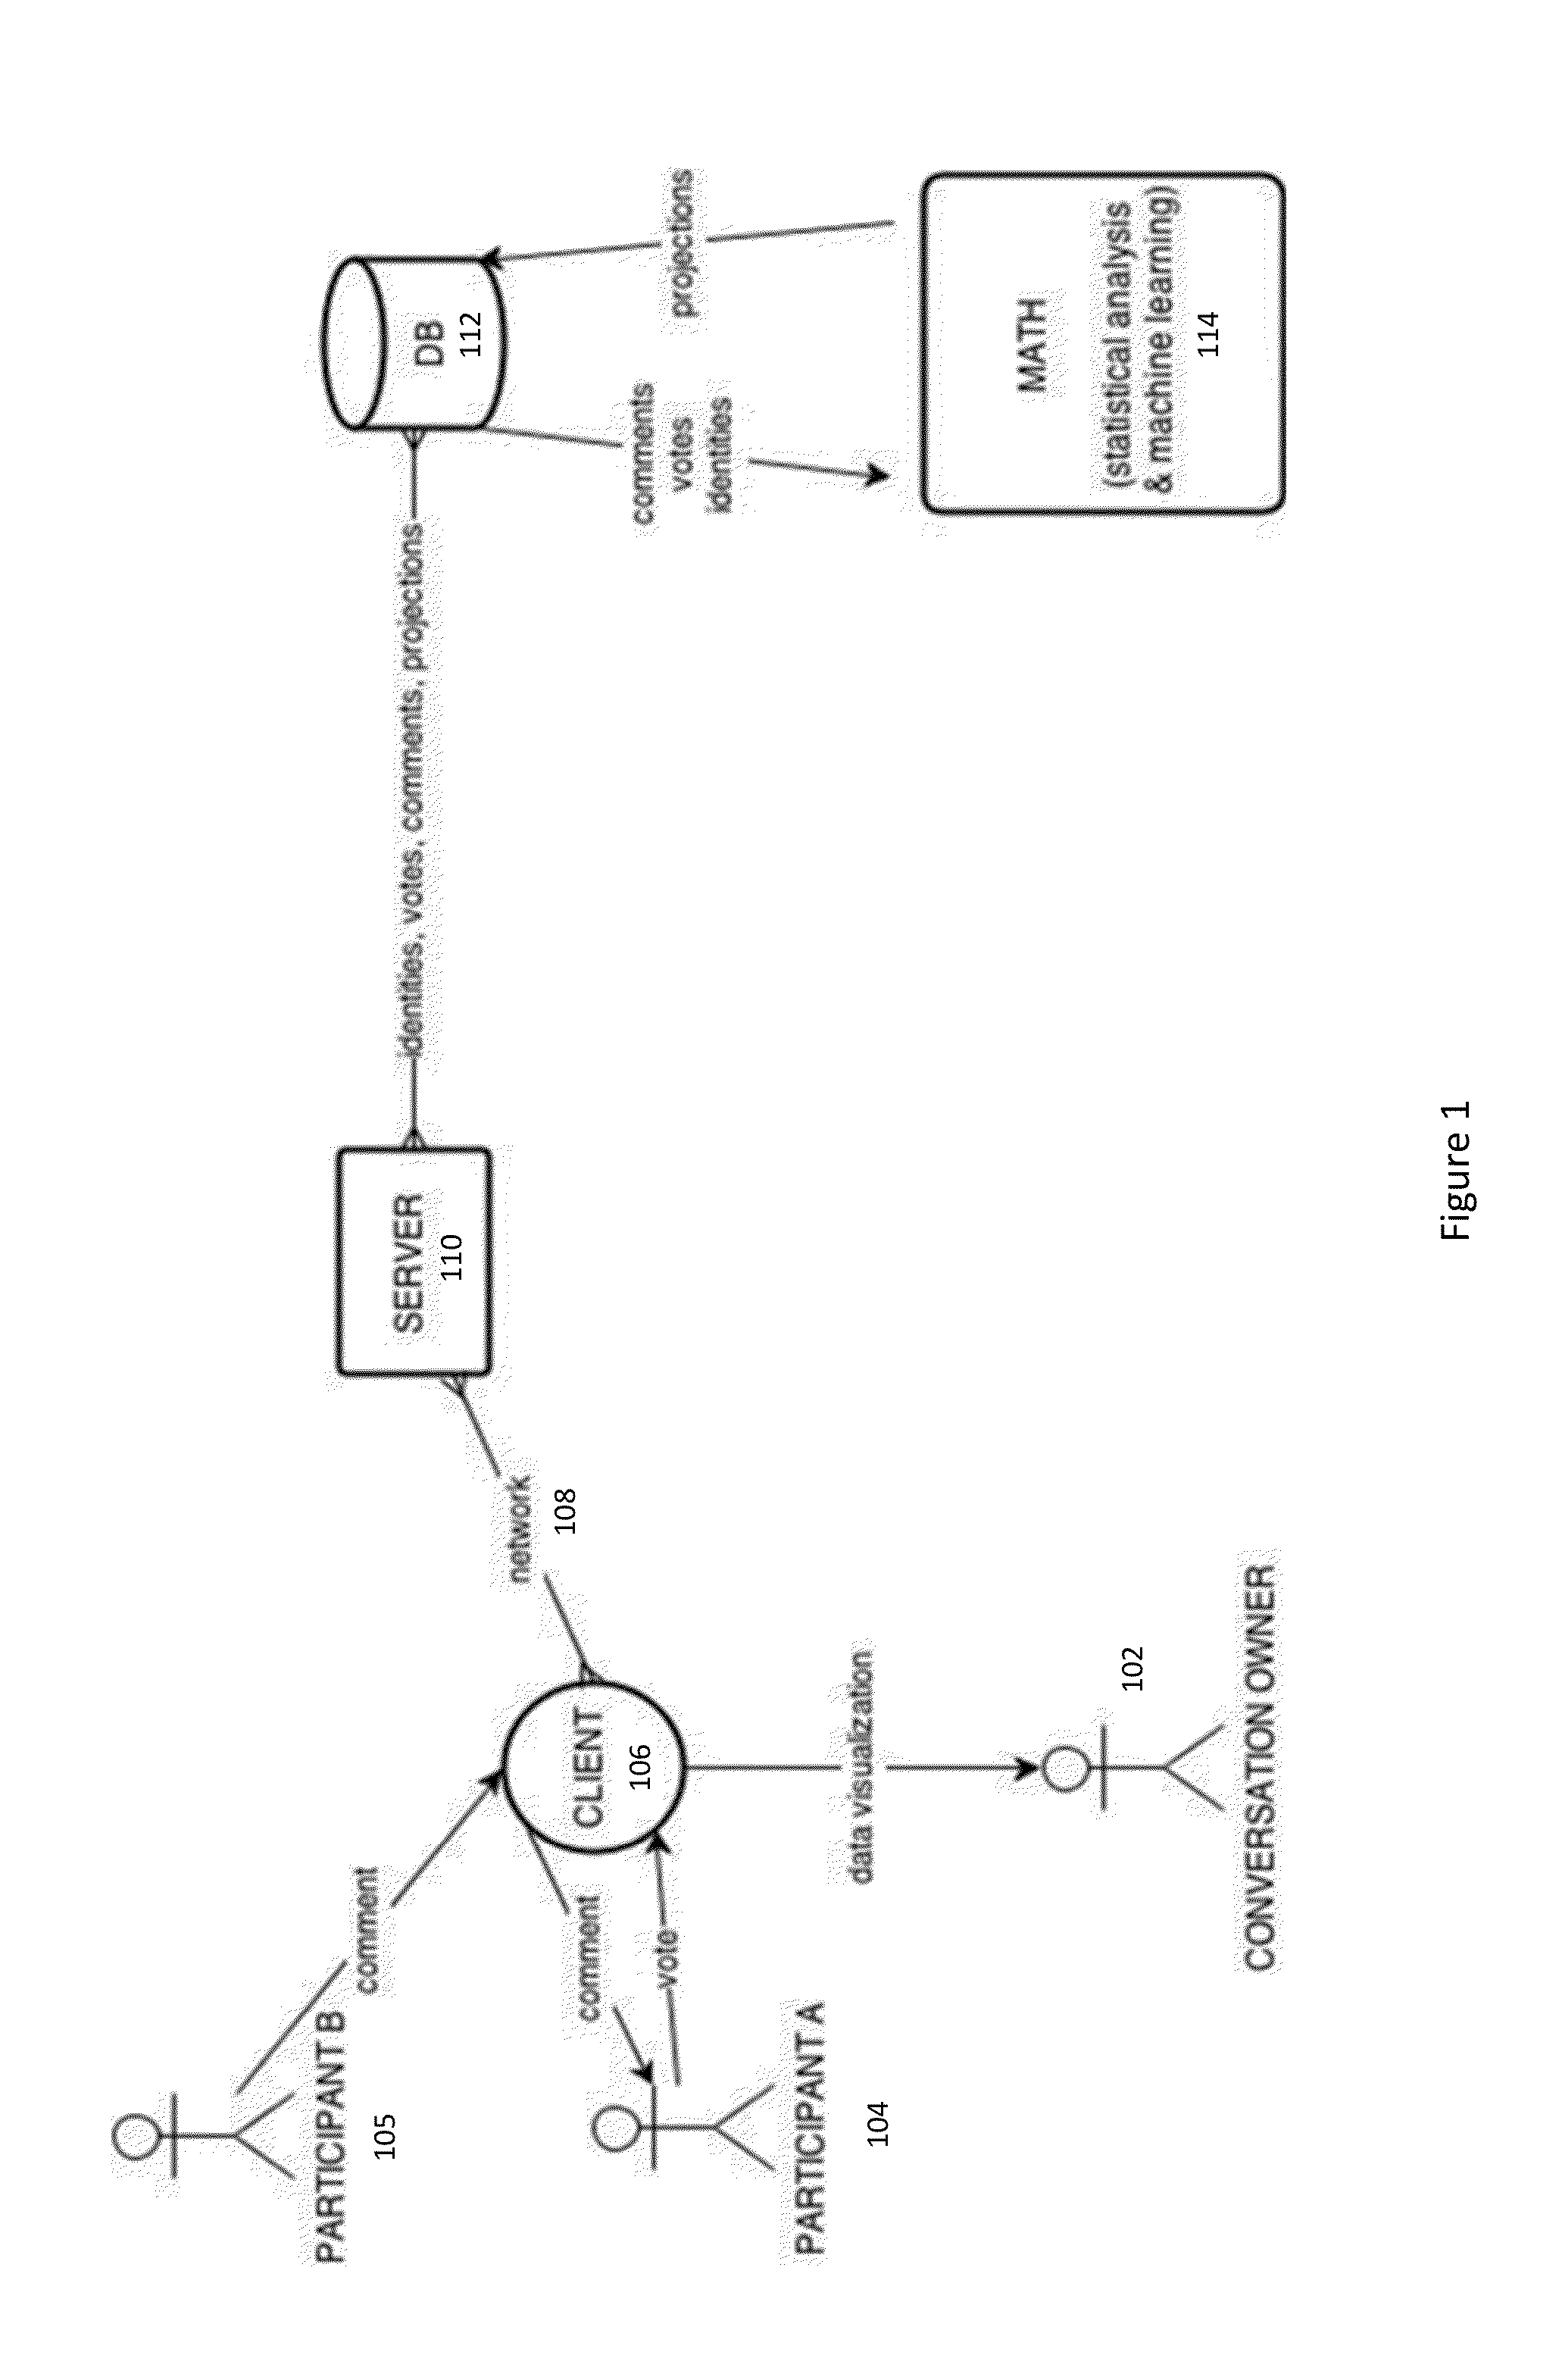 System and methods for real-time formation of groups and decentralized decision making